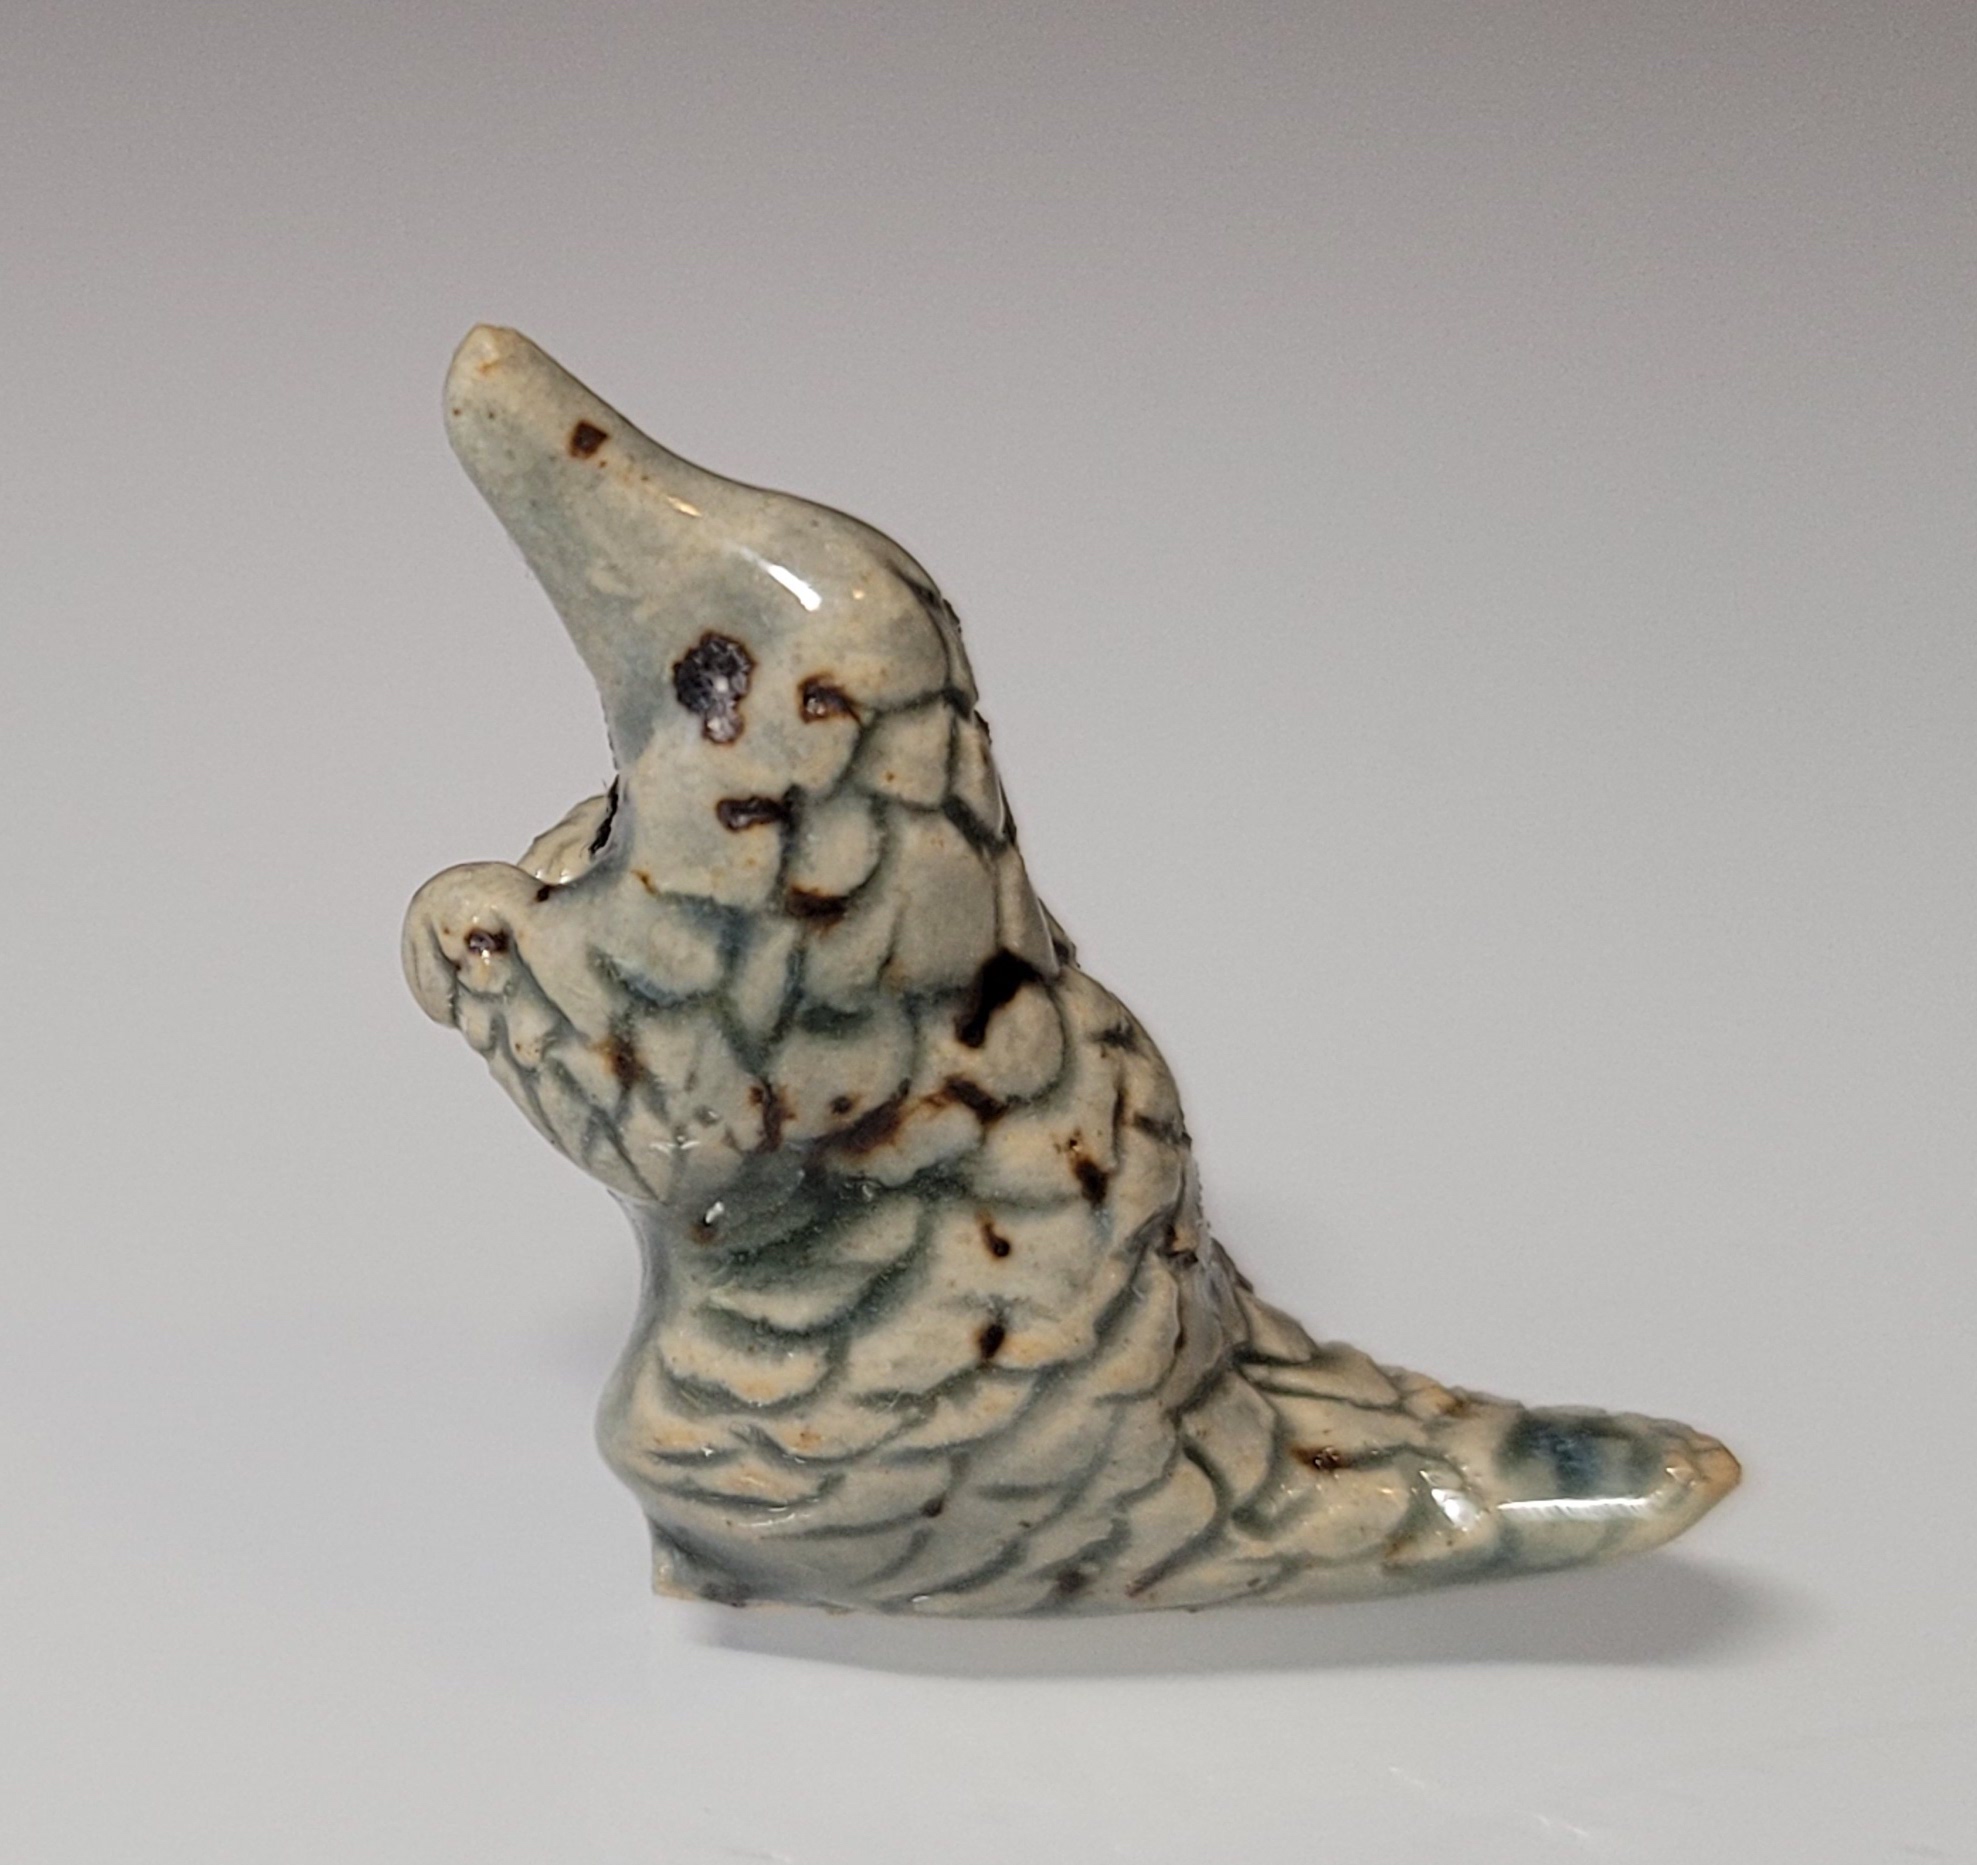 Tiny green ceramic pangolin standing up on its hind legs with paws raised as if pleading